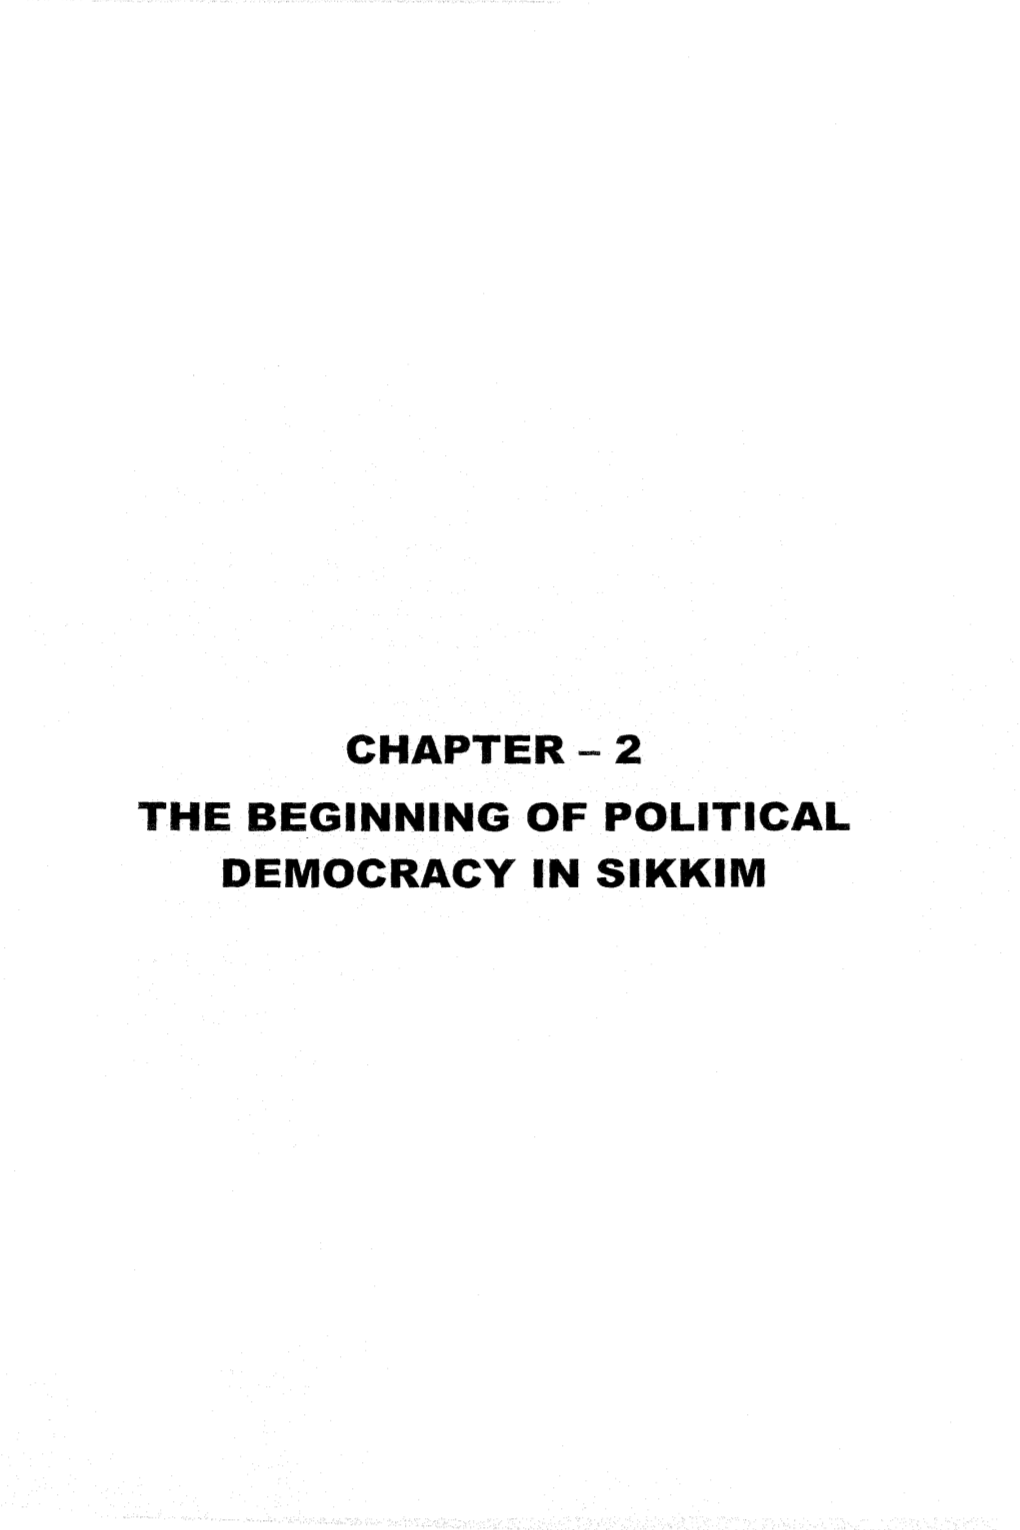 CHAPTER-2 the BEGINNING of POLITICAL DEMOCRACY in SIKKIM CHAPTER 2 the Beginning of Political Democracy in Sikkim